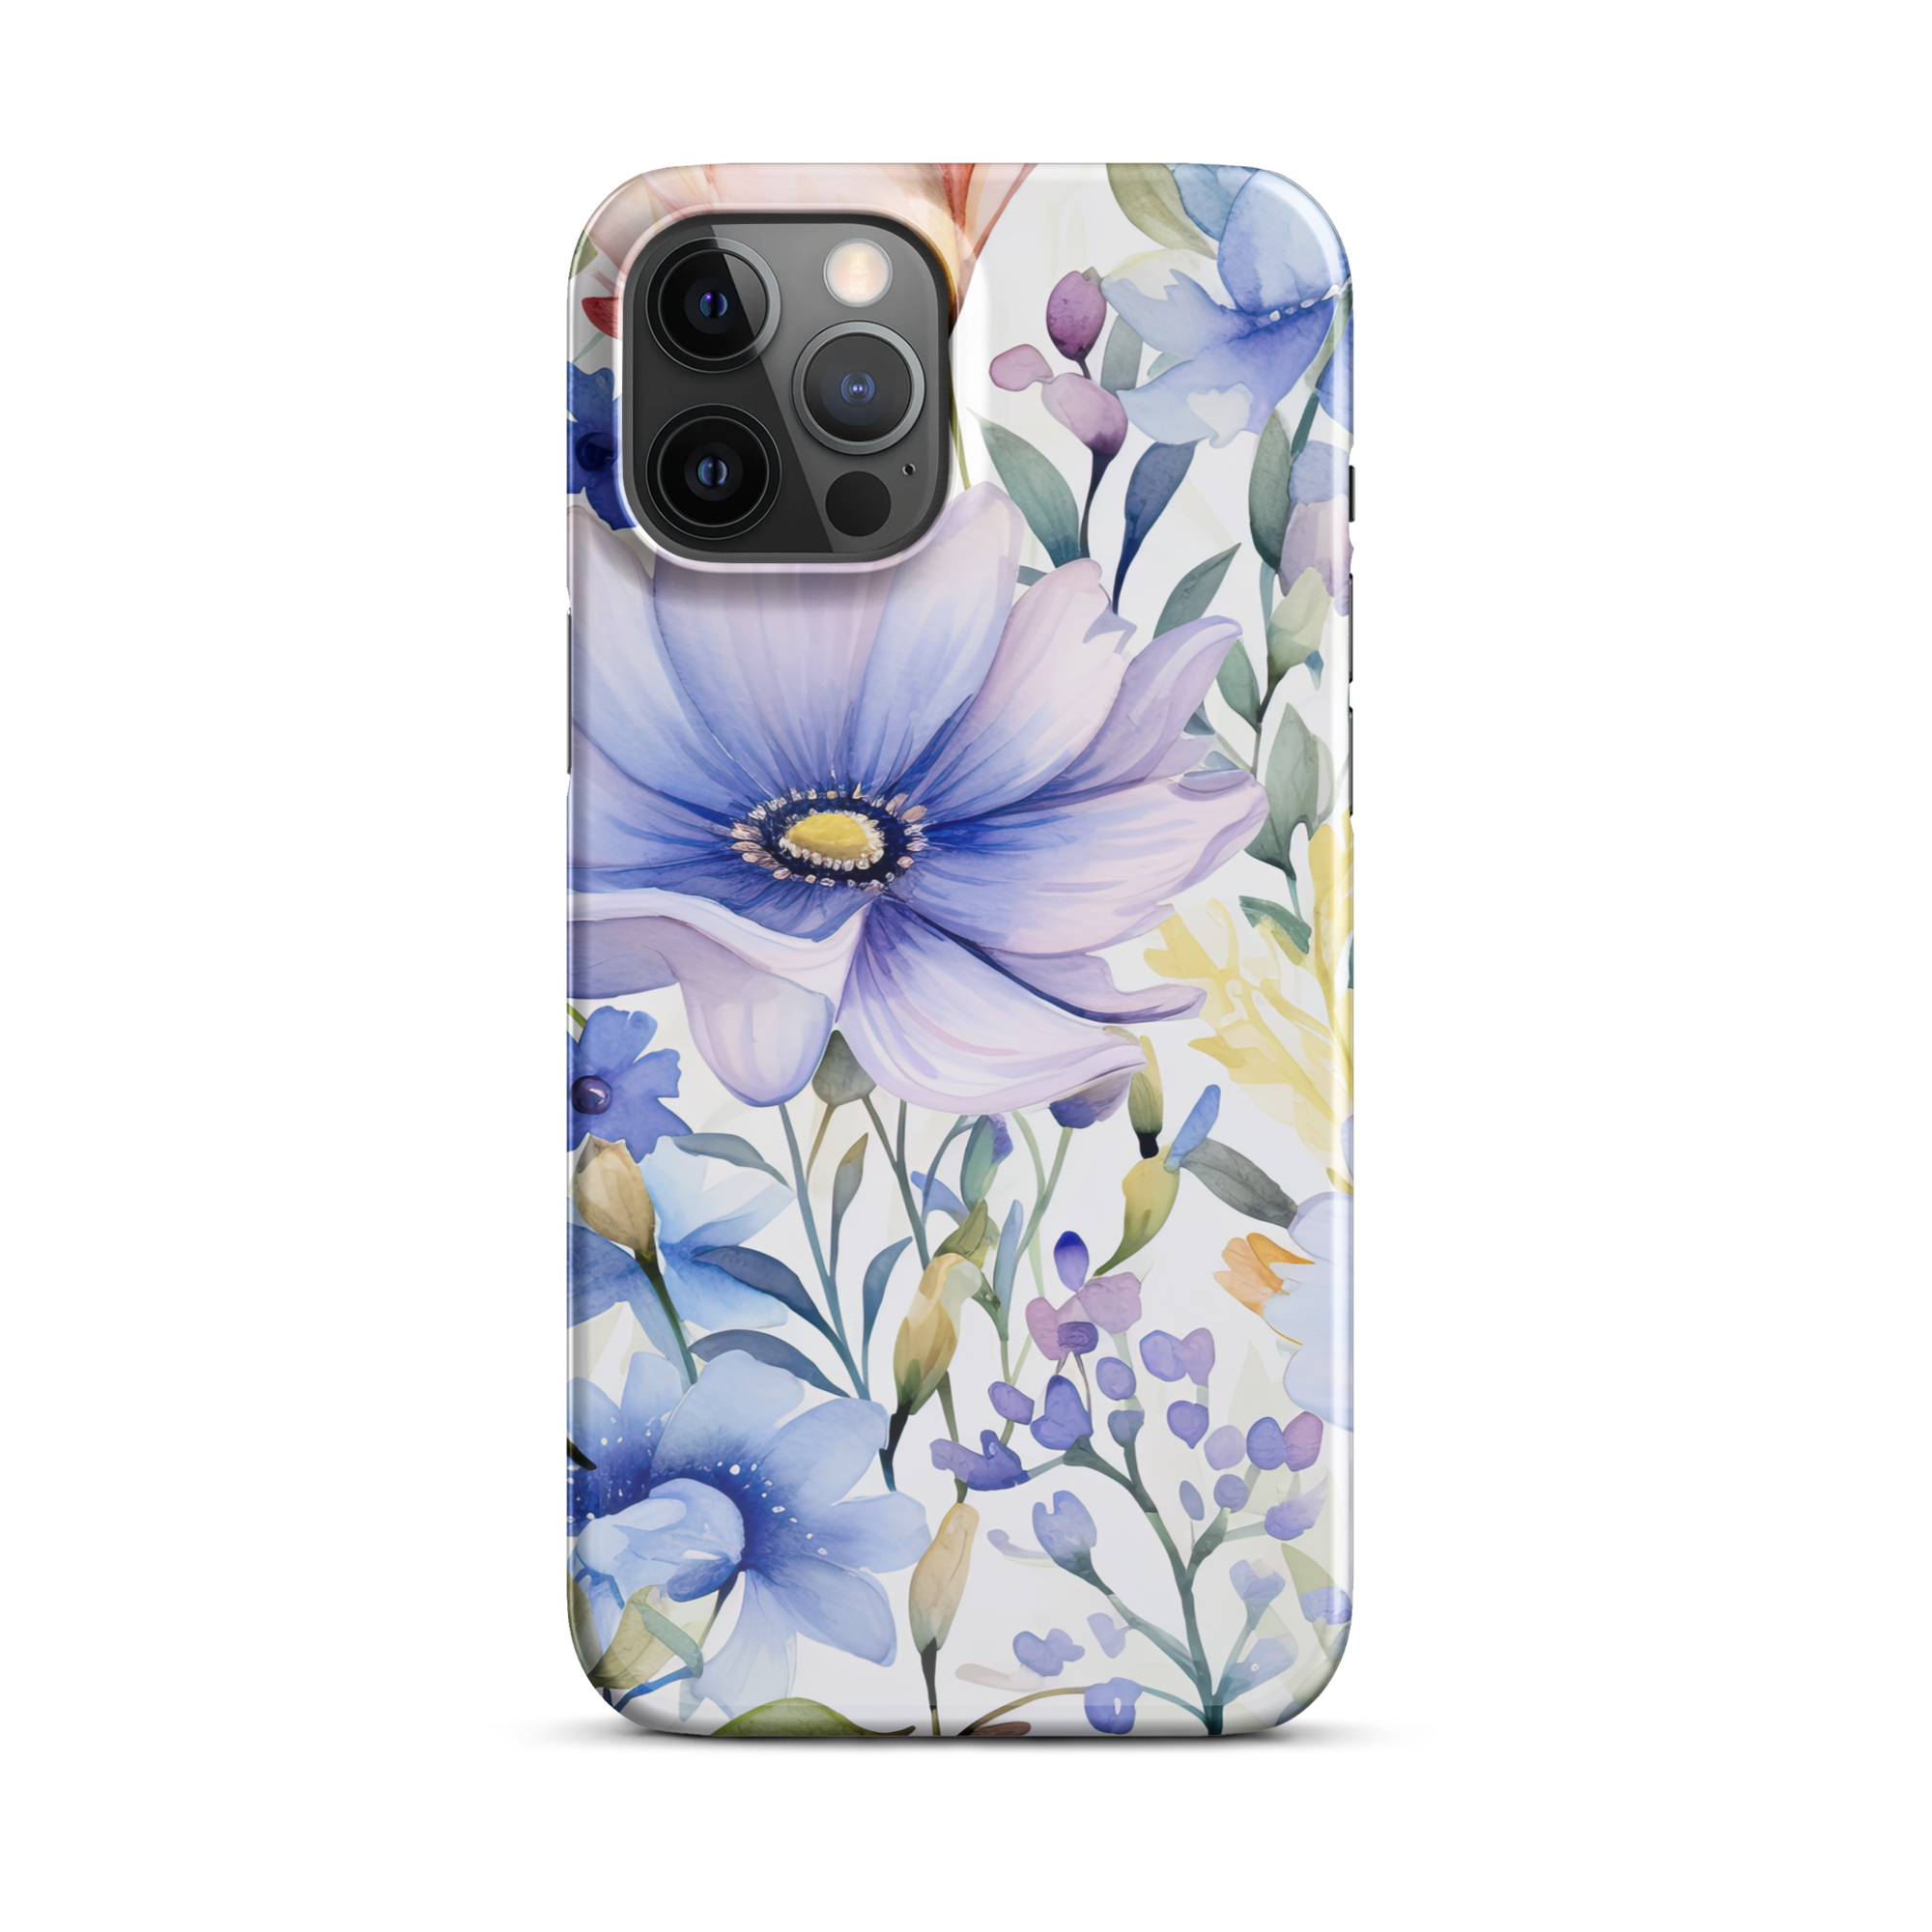 Serenity Blooms iPhone 12 Pro Max Case